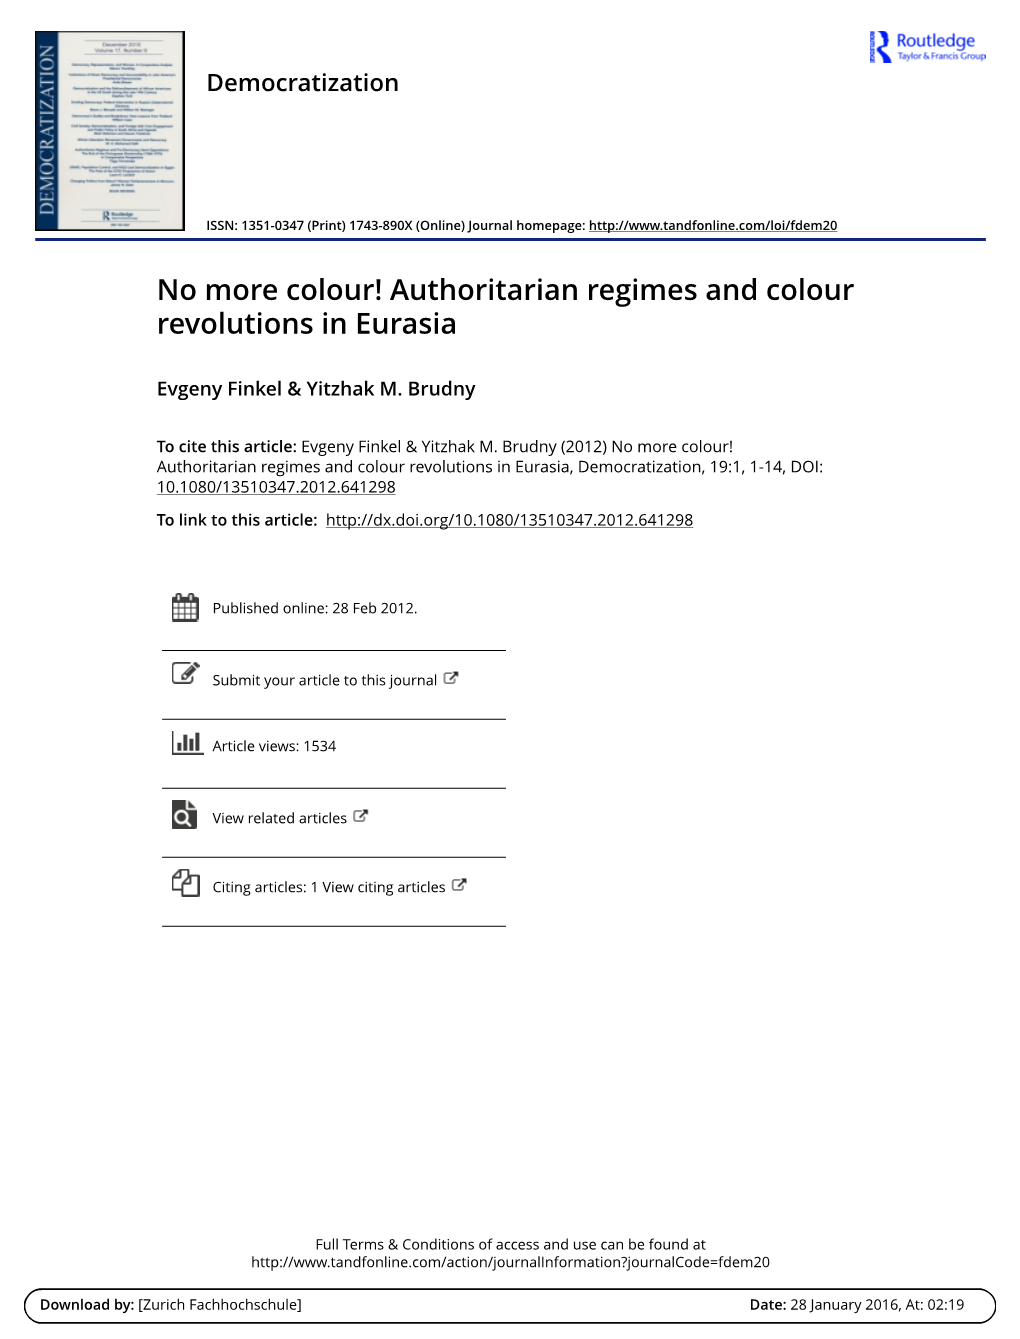 No More Colour! Authoritarian Regimes and Colour Revolutions in Eurasia